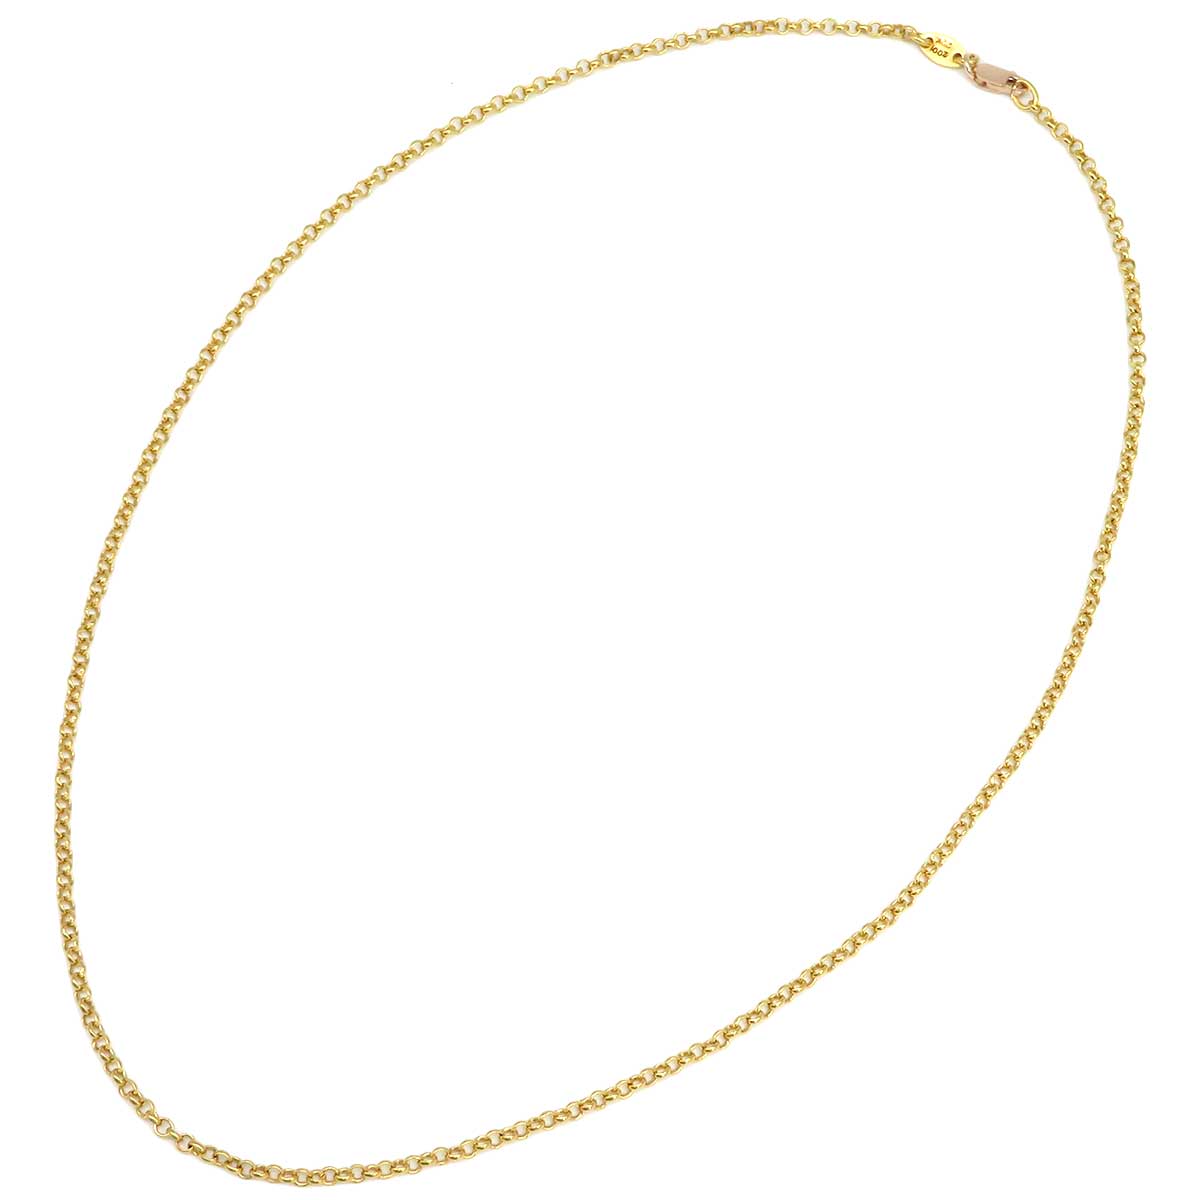 22K Chain Link Necklace